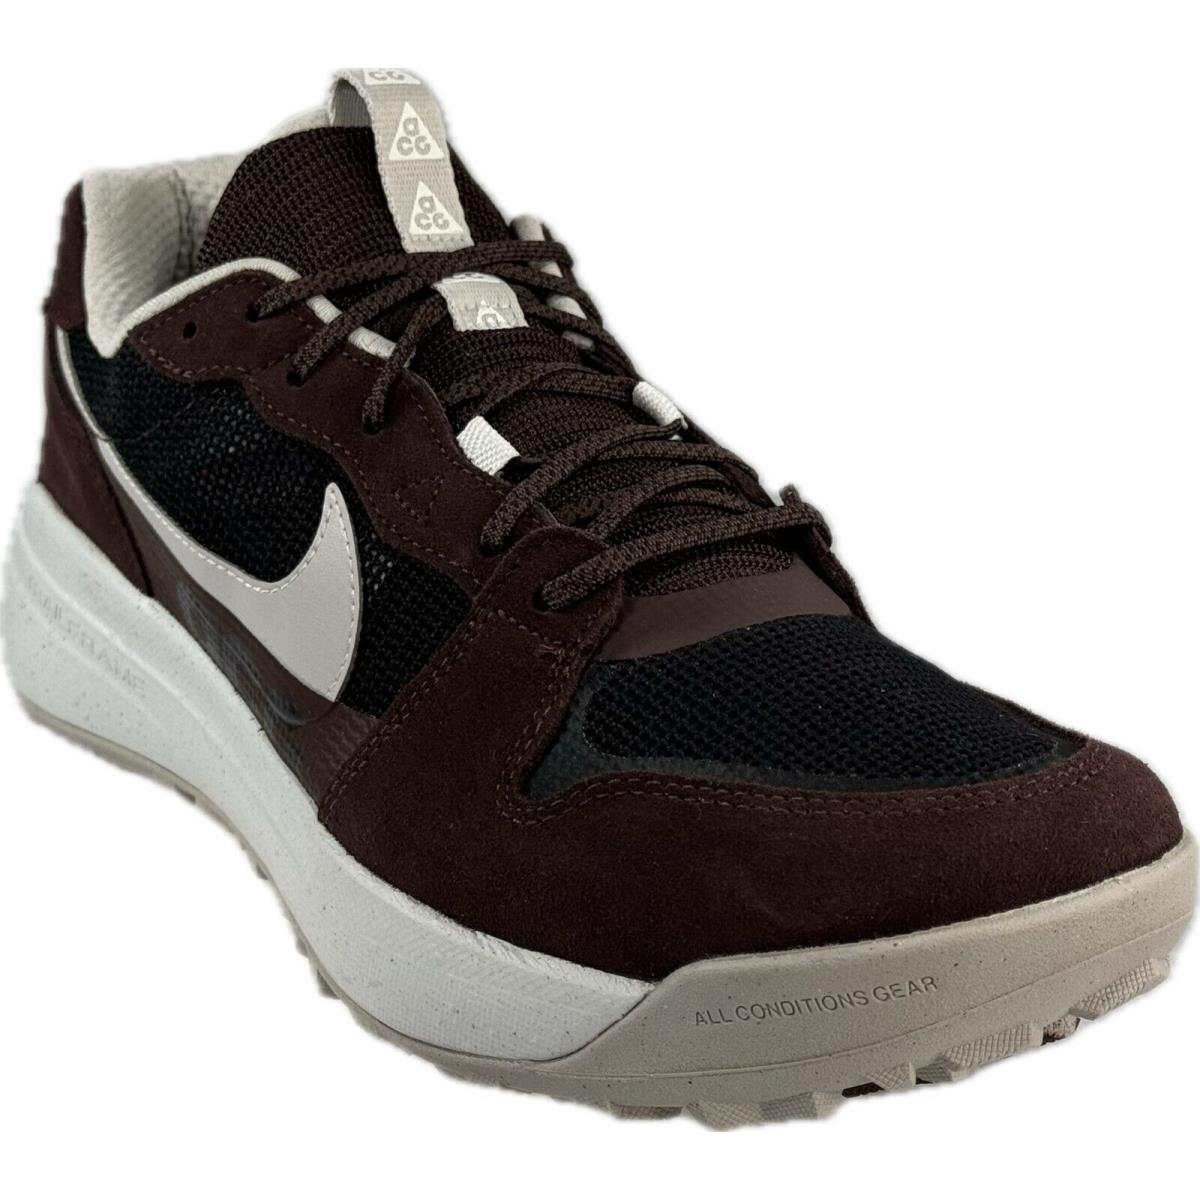 Nike Men`s Acg Lowcate Earth Black Trail Running Outdoor Shoes DM8019-202